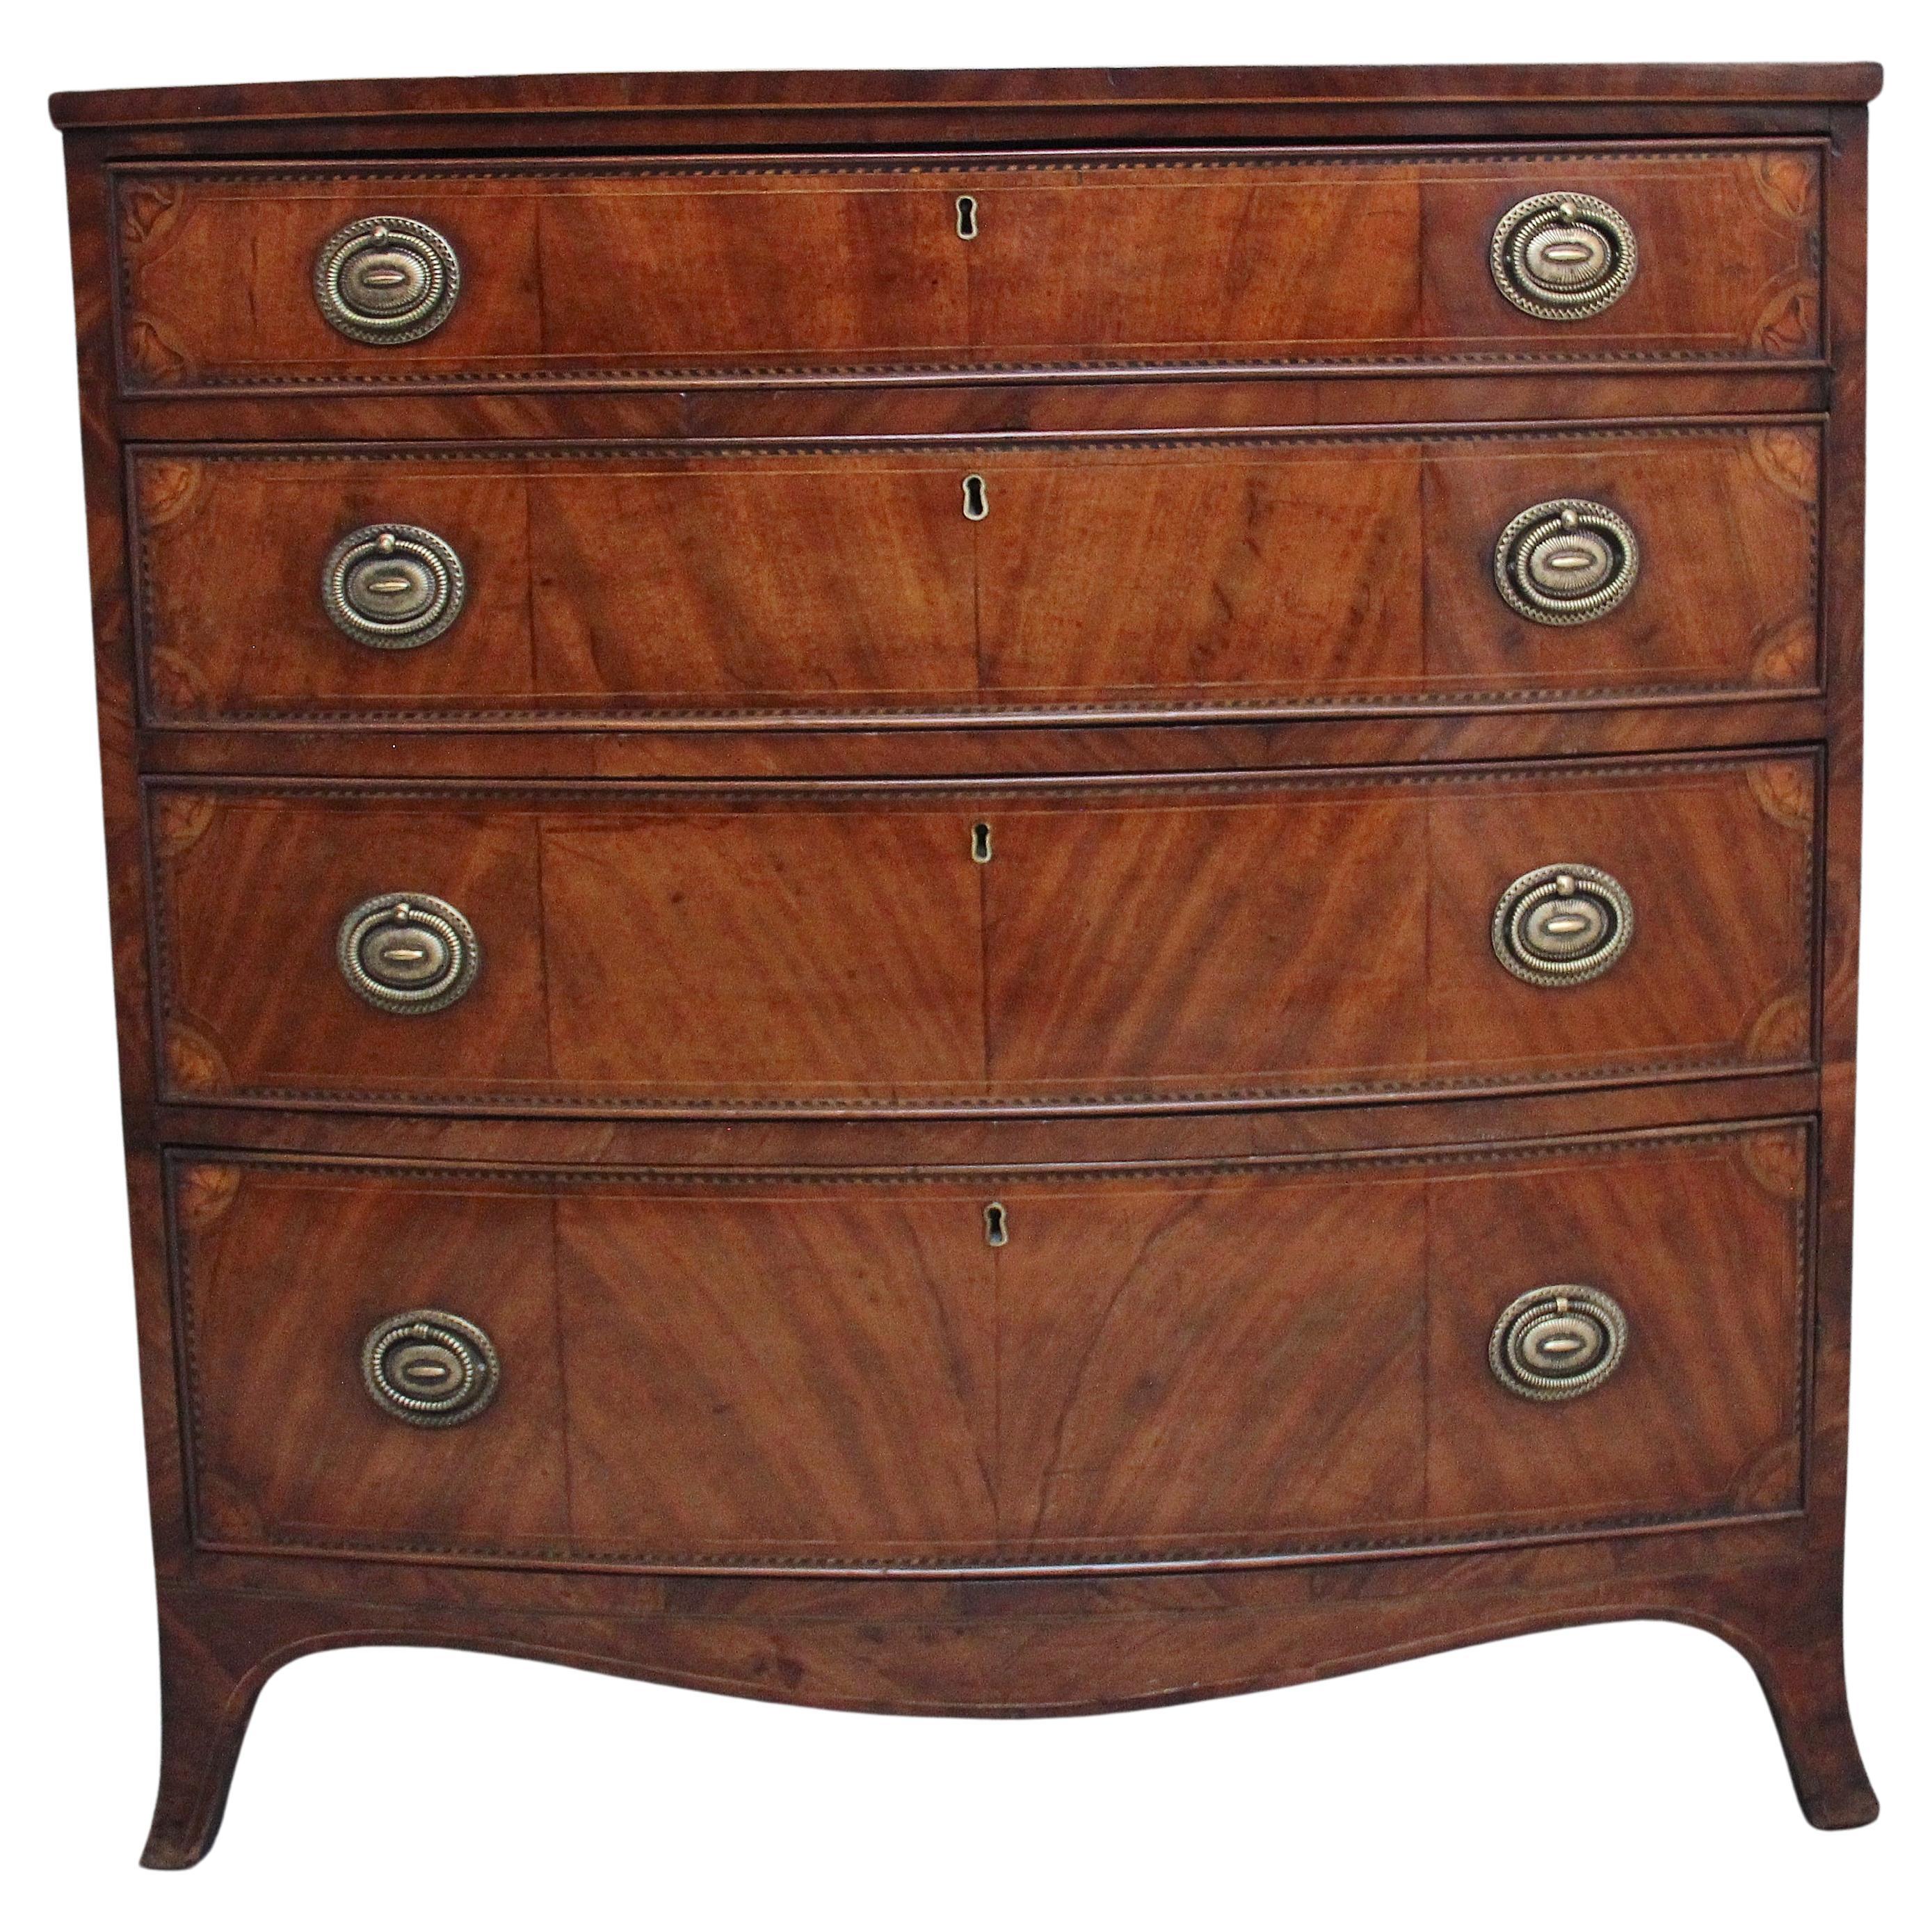 18th Century inlaid mahogany chest For Sale